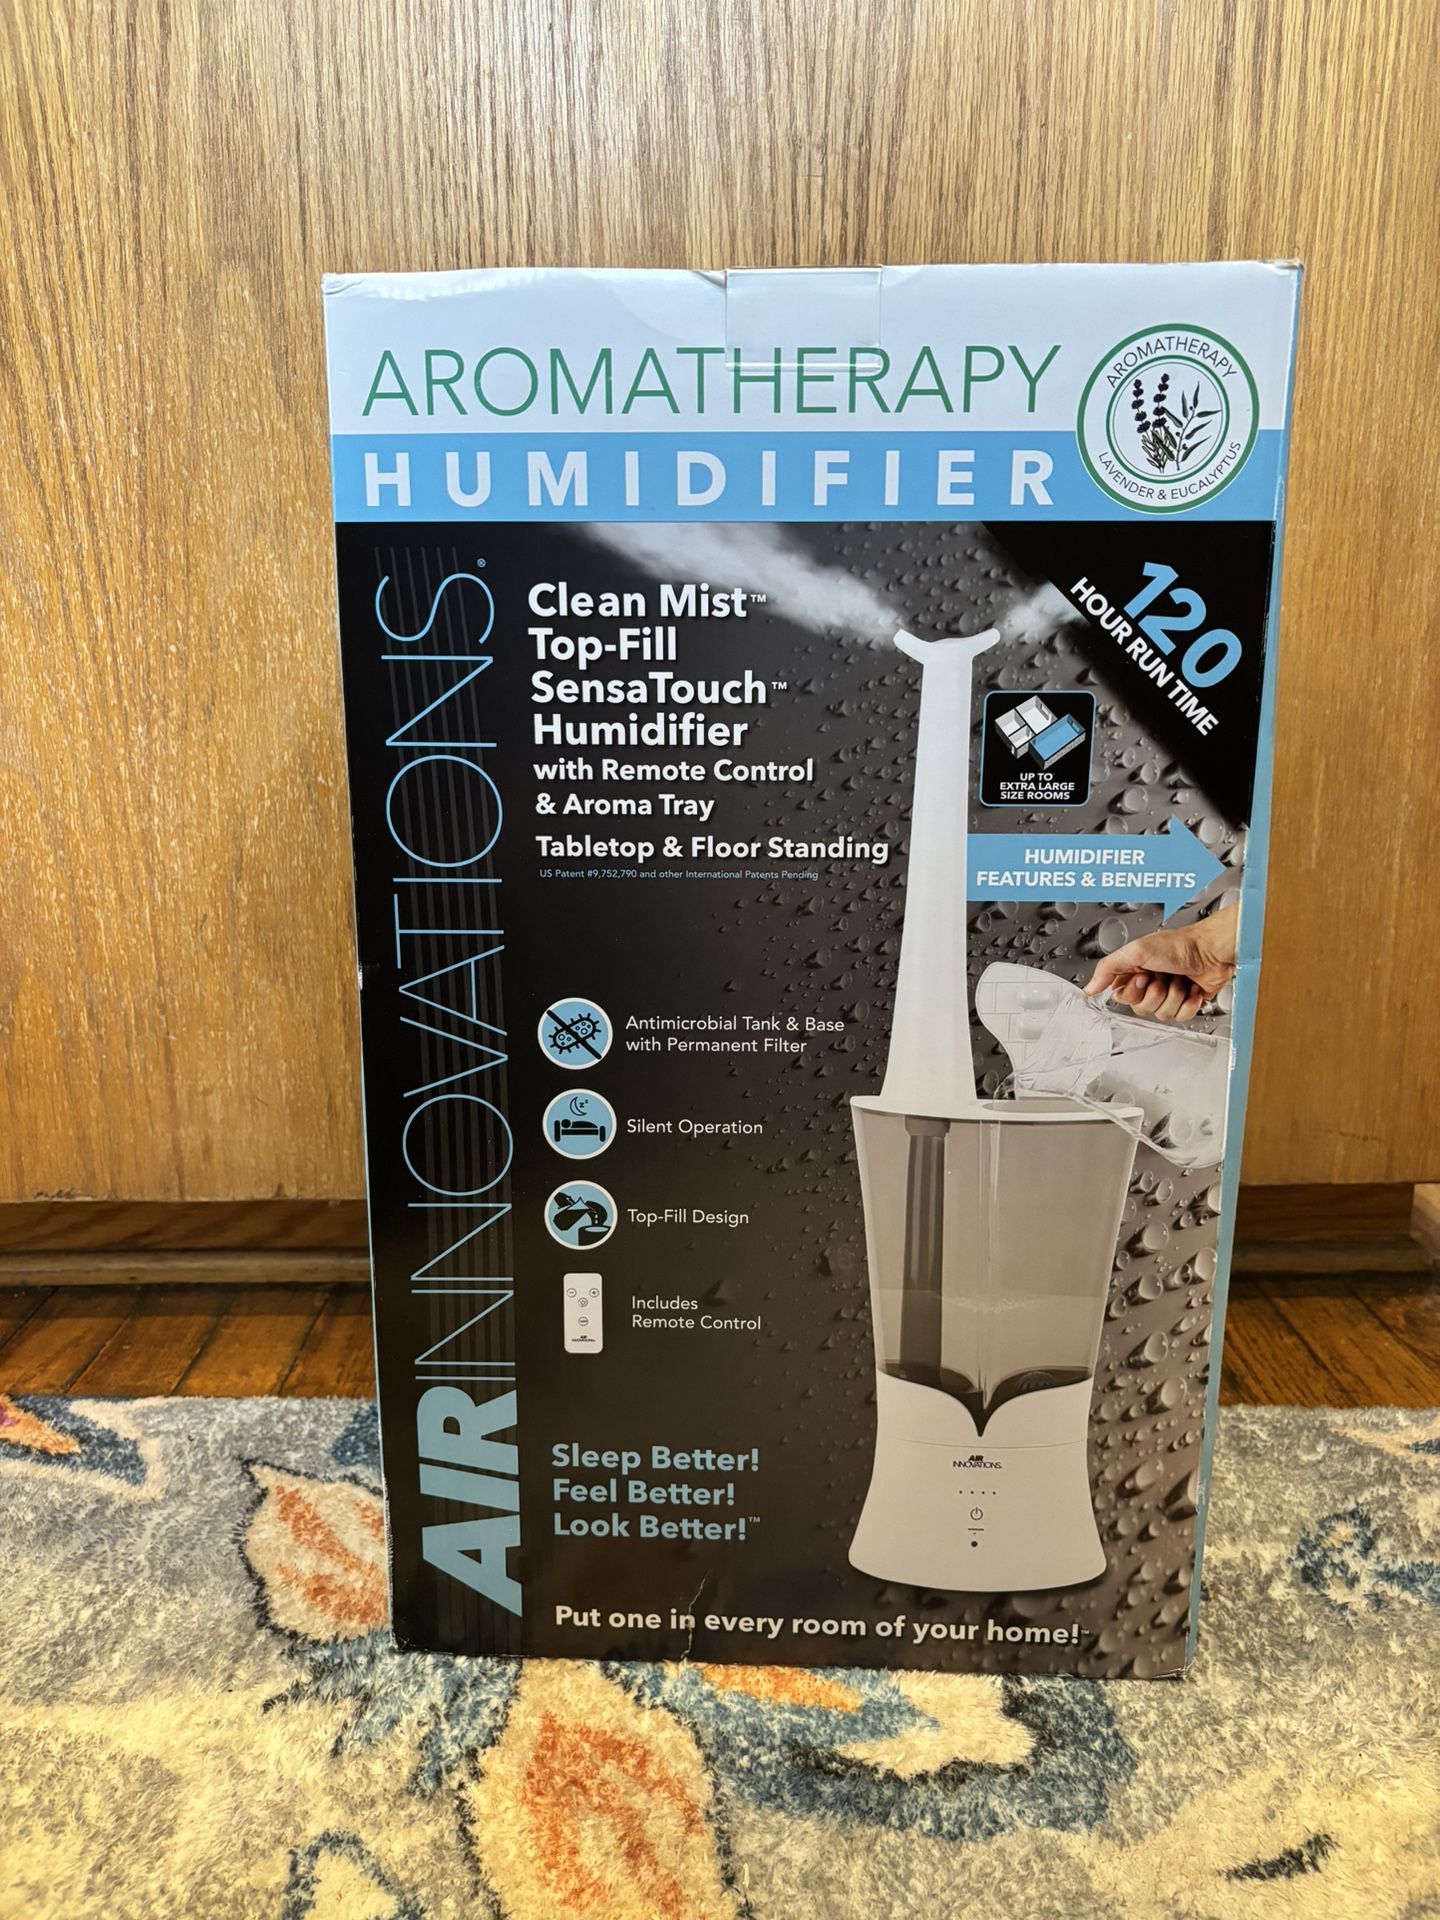 Brand New Aromatherapy Humidifier By Air Innovations